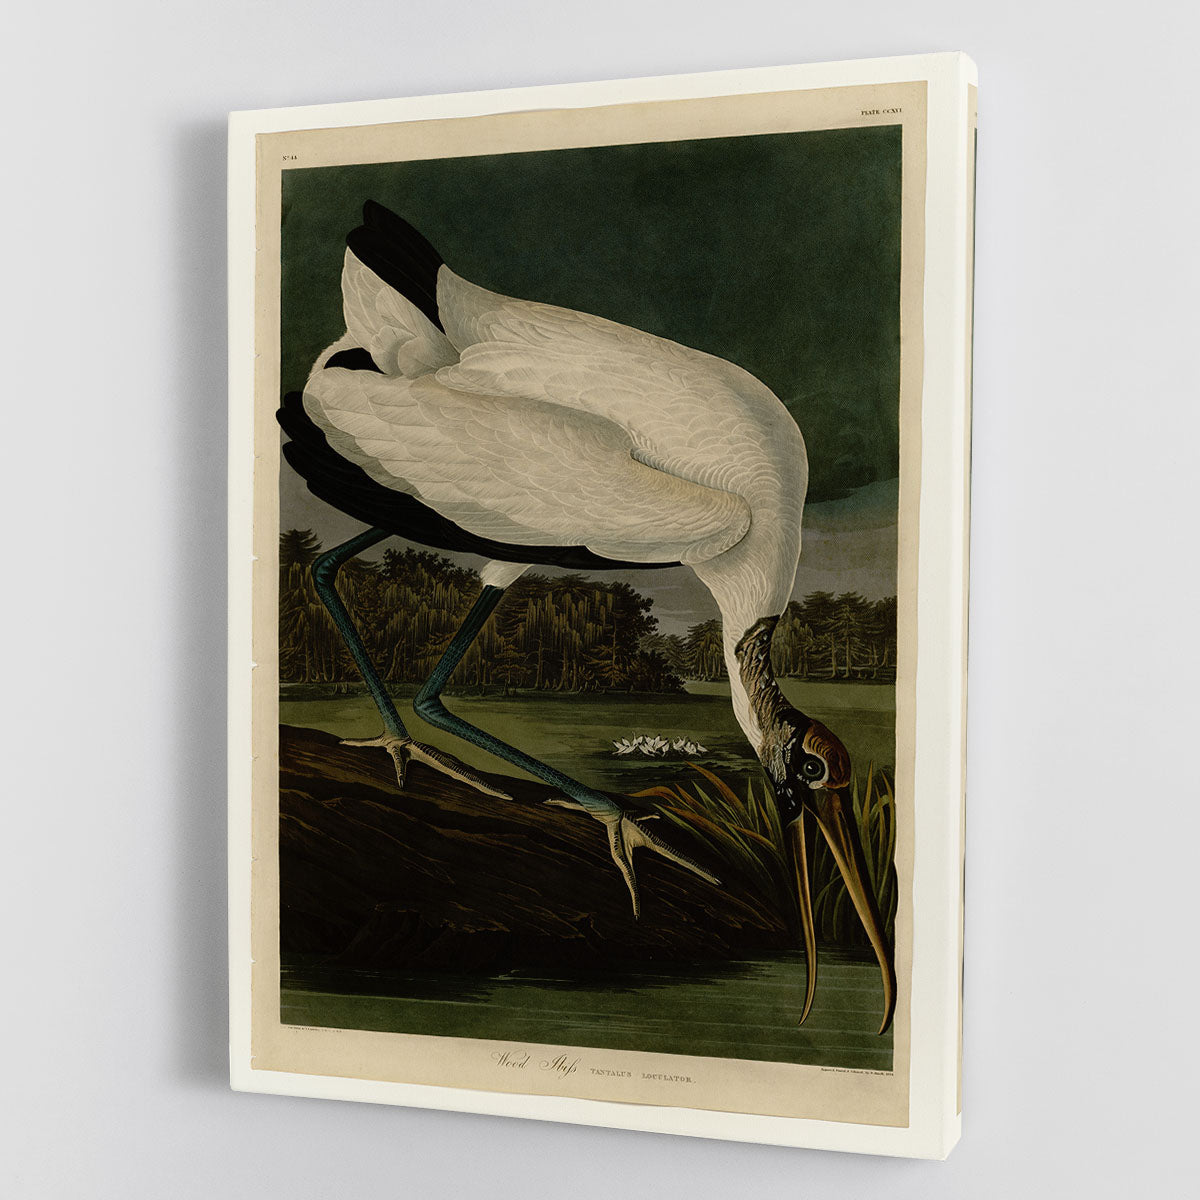 Wood Ibiss by Audubon Canvas Print or Poster - Canvas Art Rocks - 1